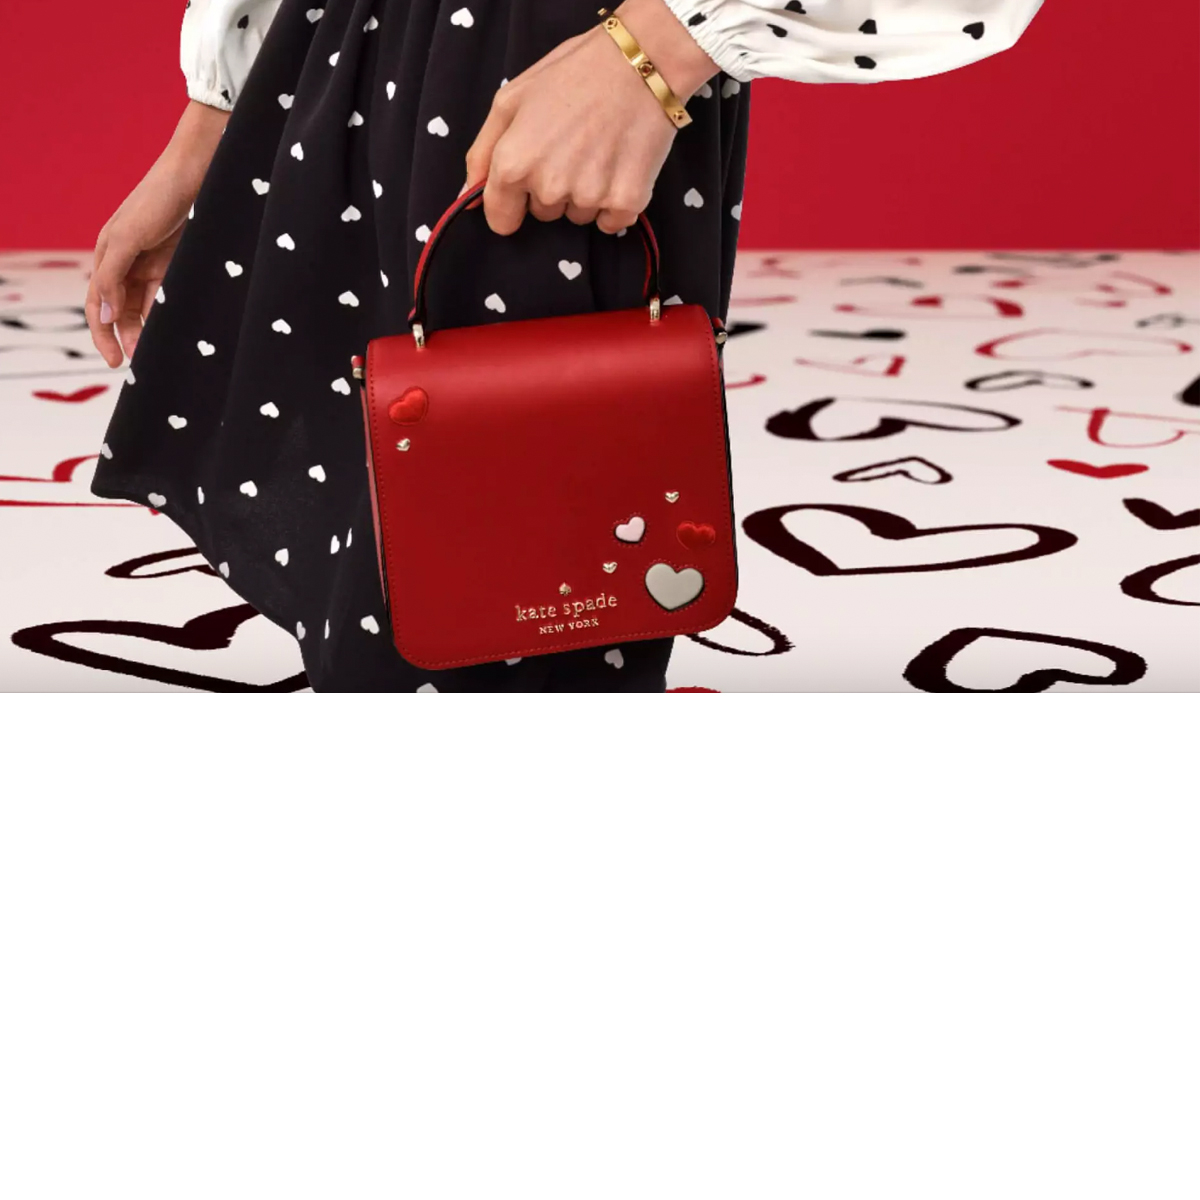 Kate Spade 24-Hour Flash Deal: Get a $300 Crossbody Bag for Just $65